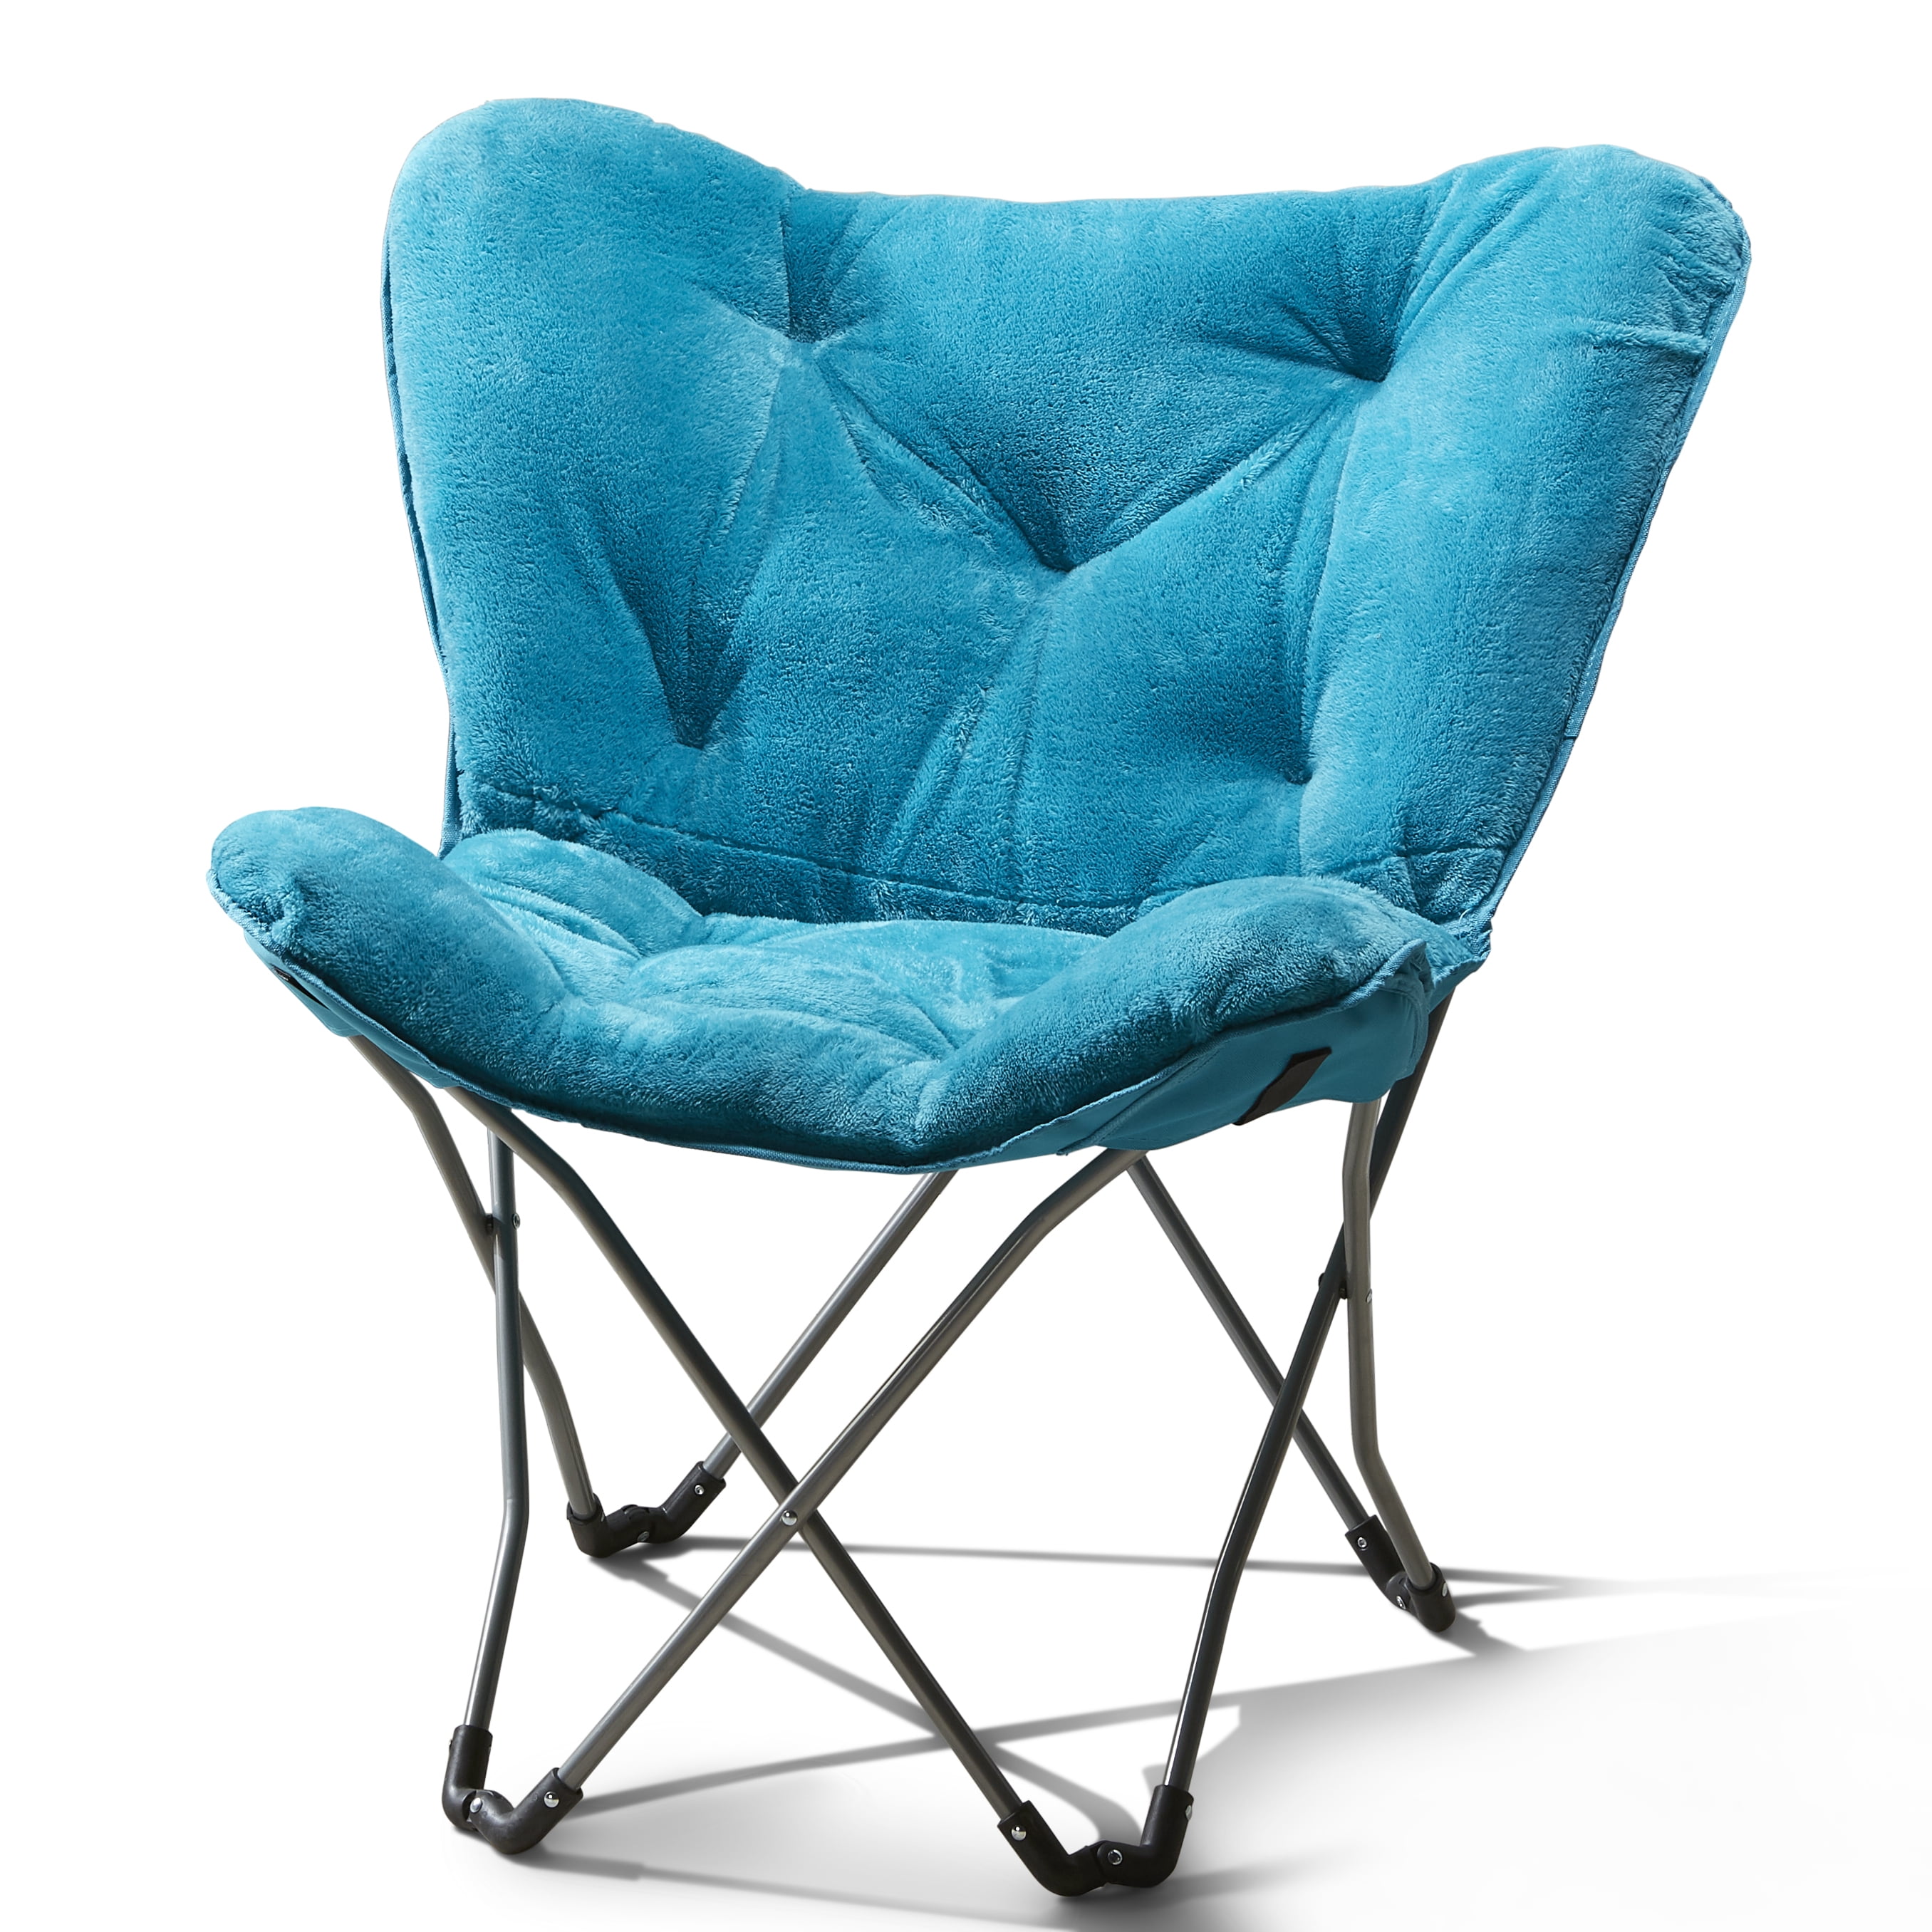 Mainstays Fabric Folding Butterfly Chair, Multiple Colors - Walmart.com